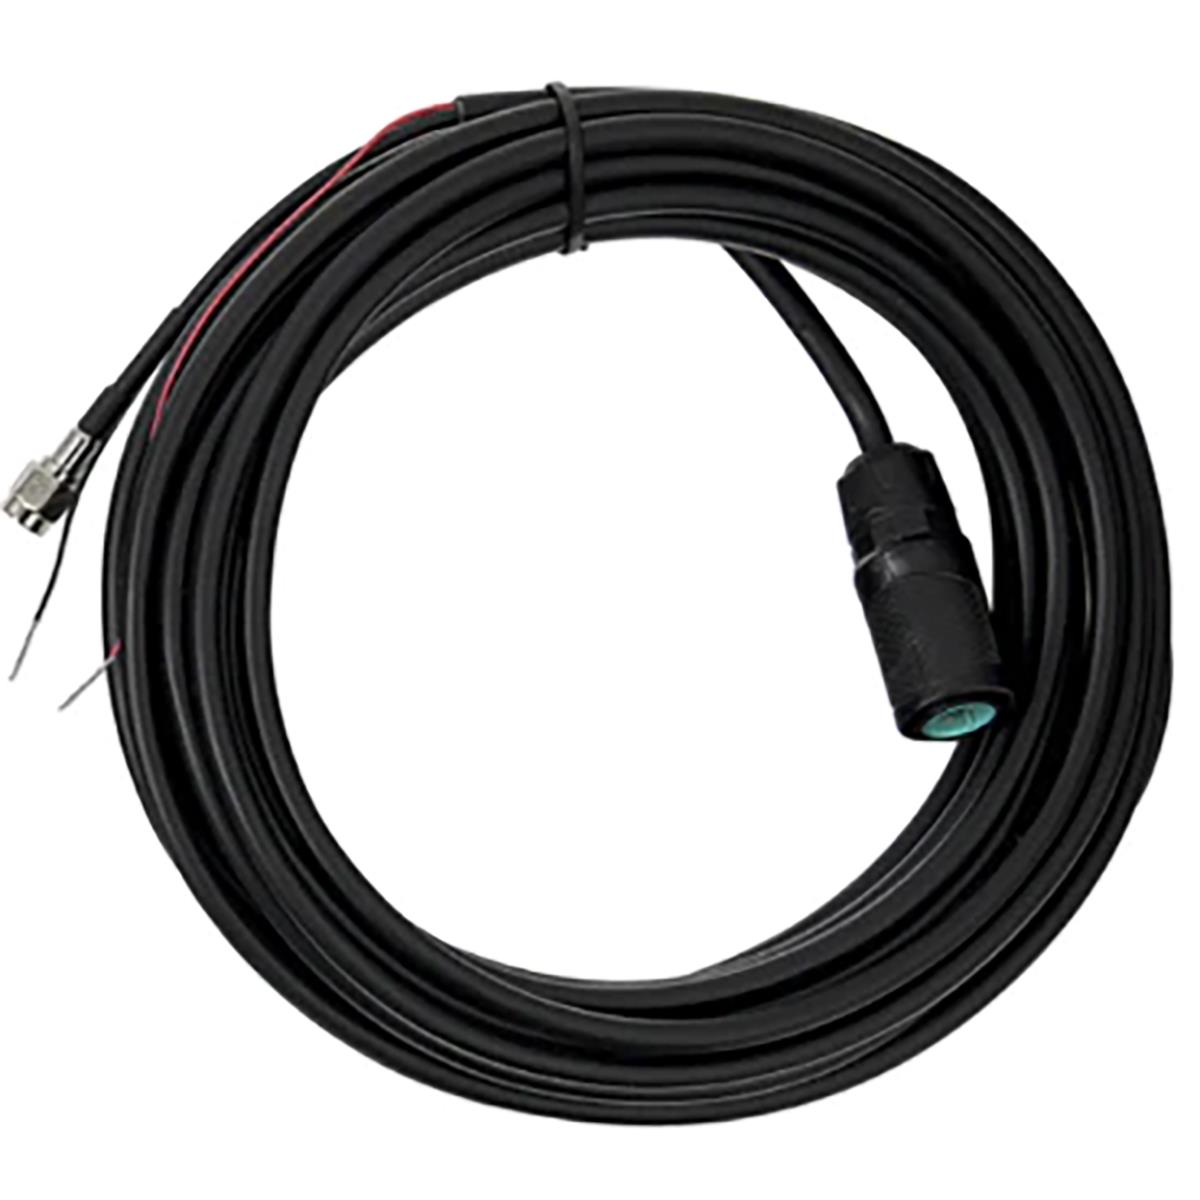 Image of SiOnyx Analog Video Power Cable for Nightwave Camera 16.4'